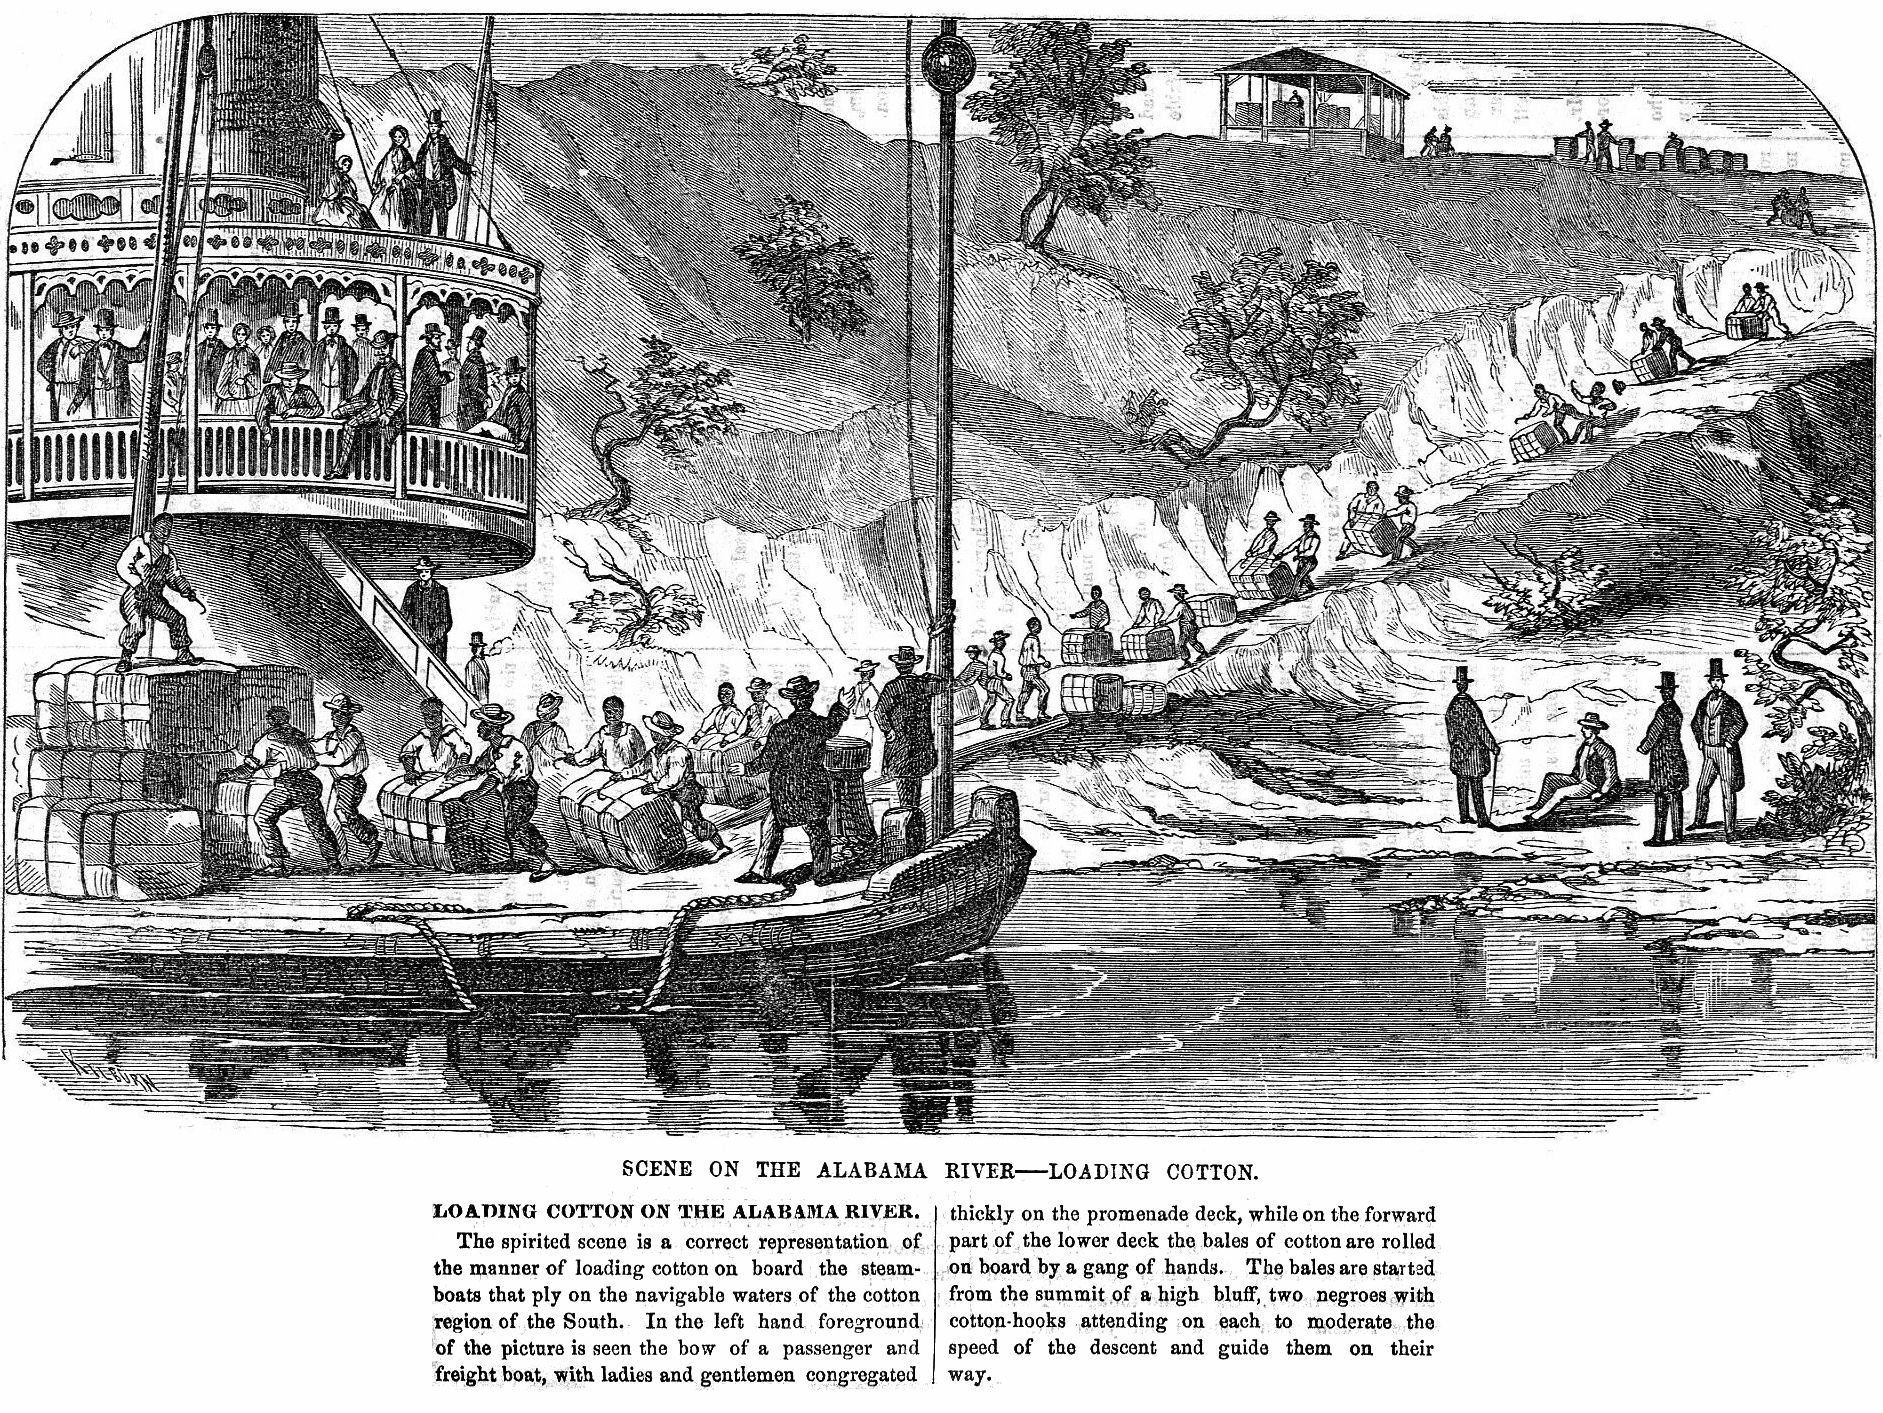 1865 illustration of loading cotton on steamboats